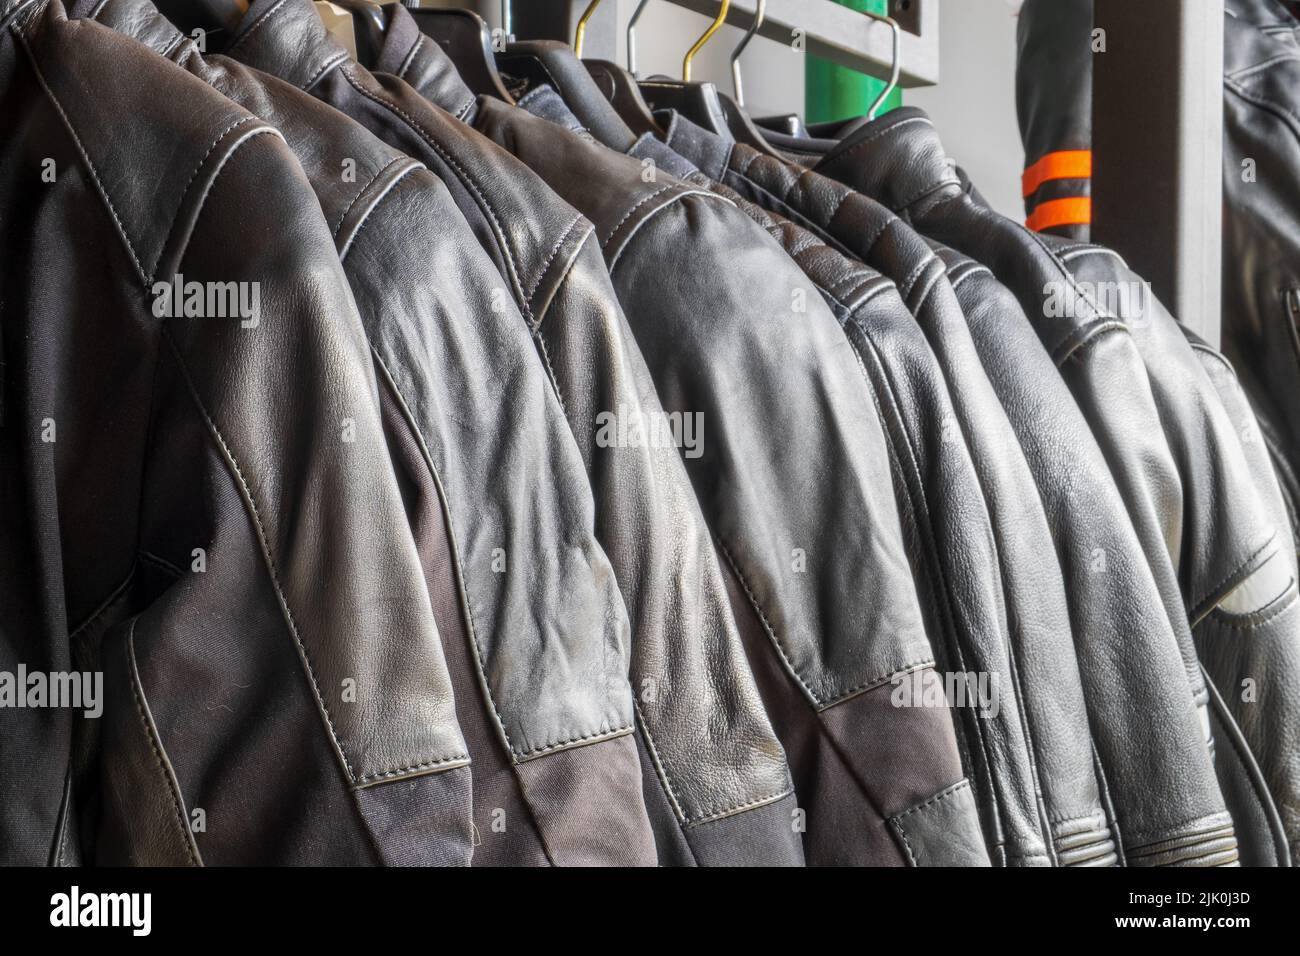 Black leather jackets for motorcyclists hang in a row close-up Stock Photo